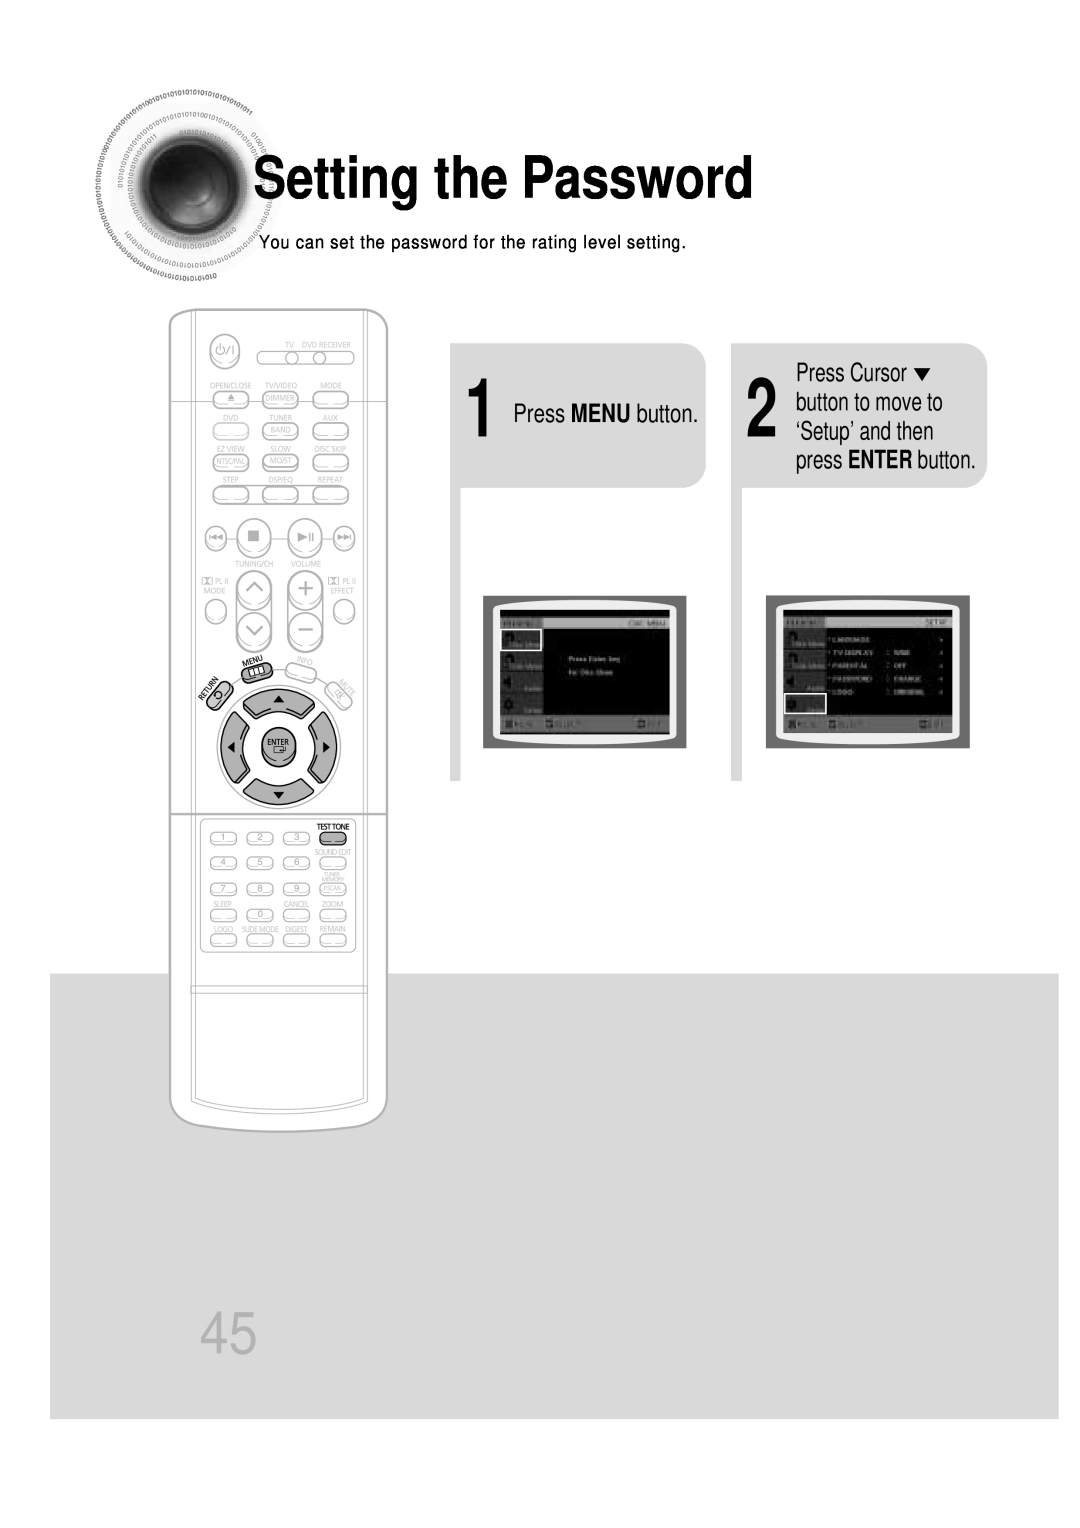 Samsung HT-DB600 instruction manual Setting the Password, Press Cursor 1 2 button to move to Press MENU button 